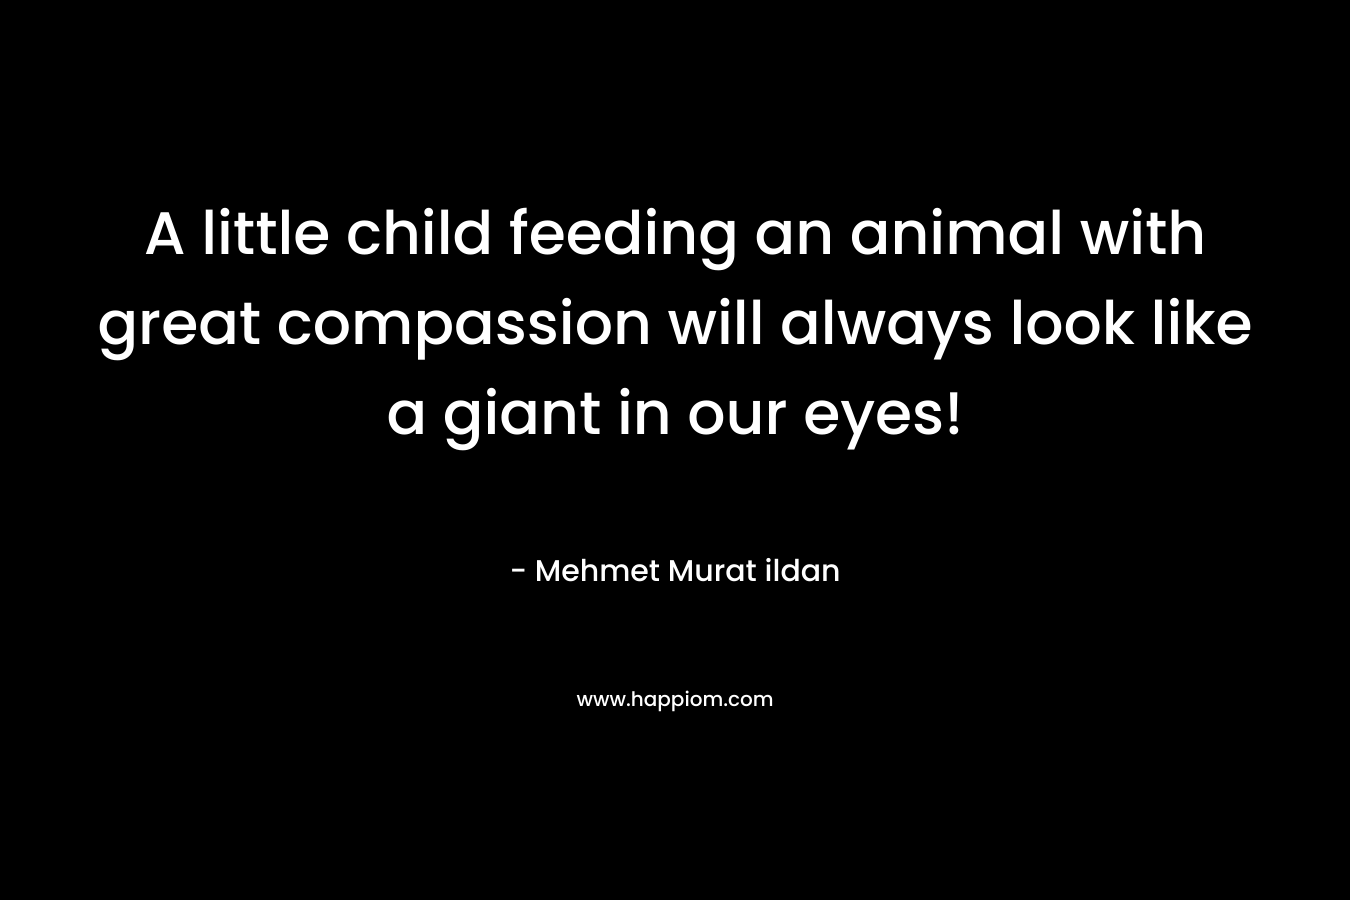 A little child feeding an animal with great compassion will always look like a giant in our eyes! – Mehmet Murat ildan